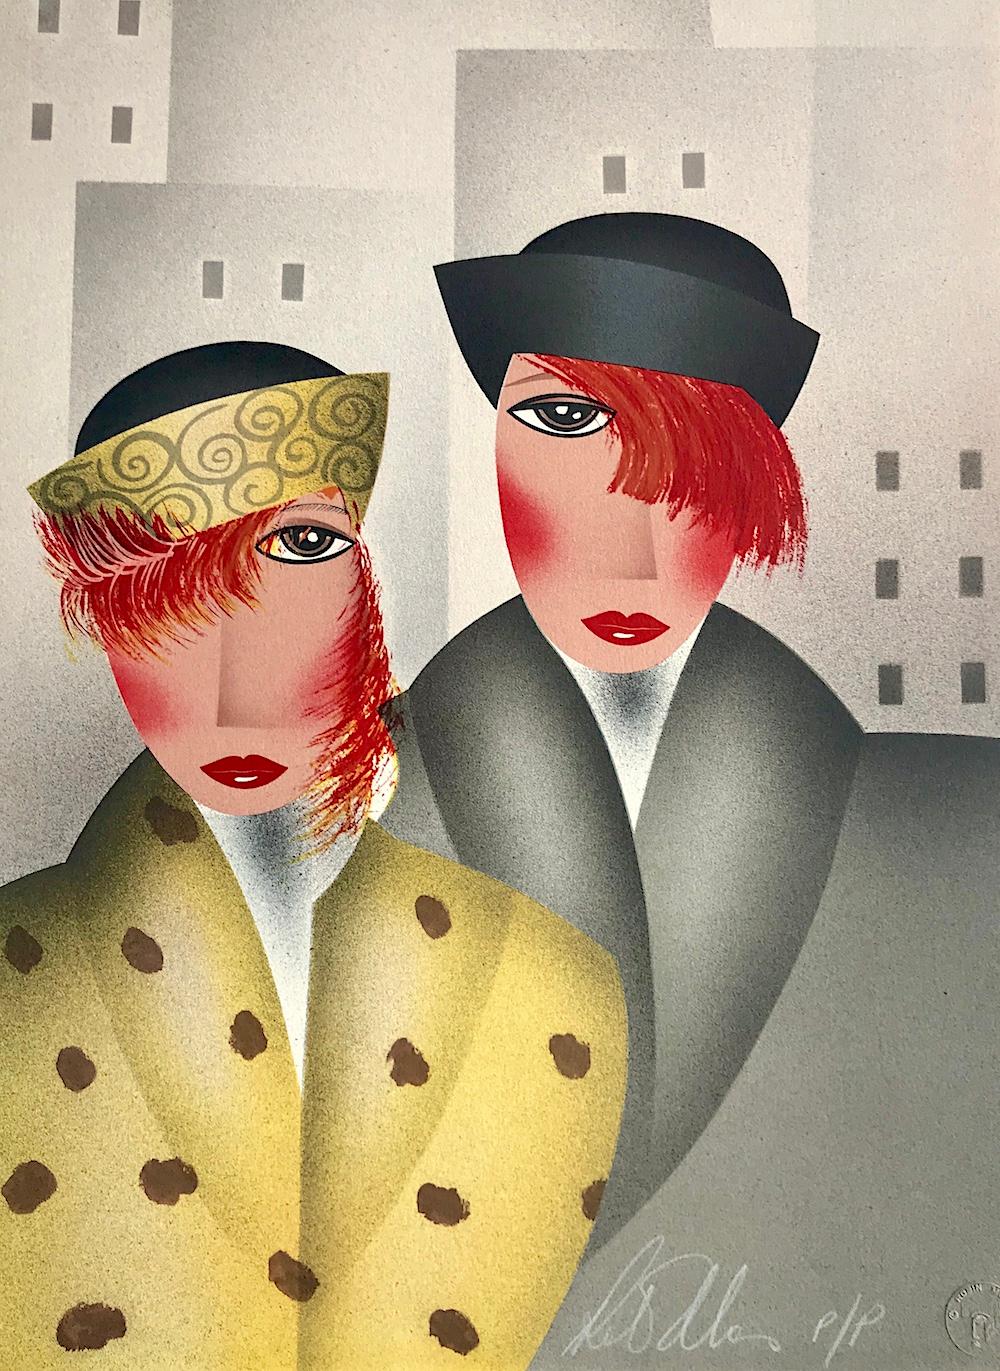 Robin Morris Figurative Print - MARY and EDDIE Signed Lithograph, Art Deco Portrait, Red Hair, Shawl-collar Coat